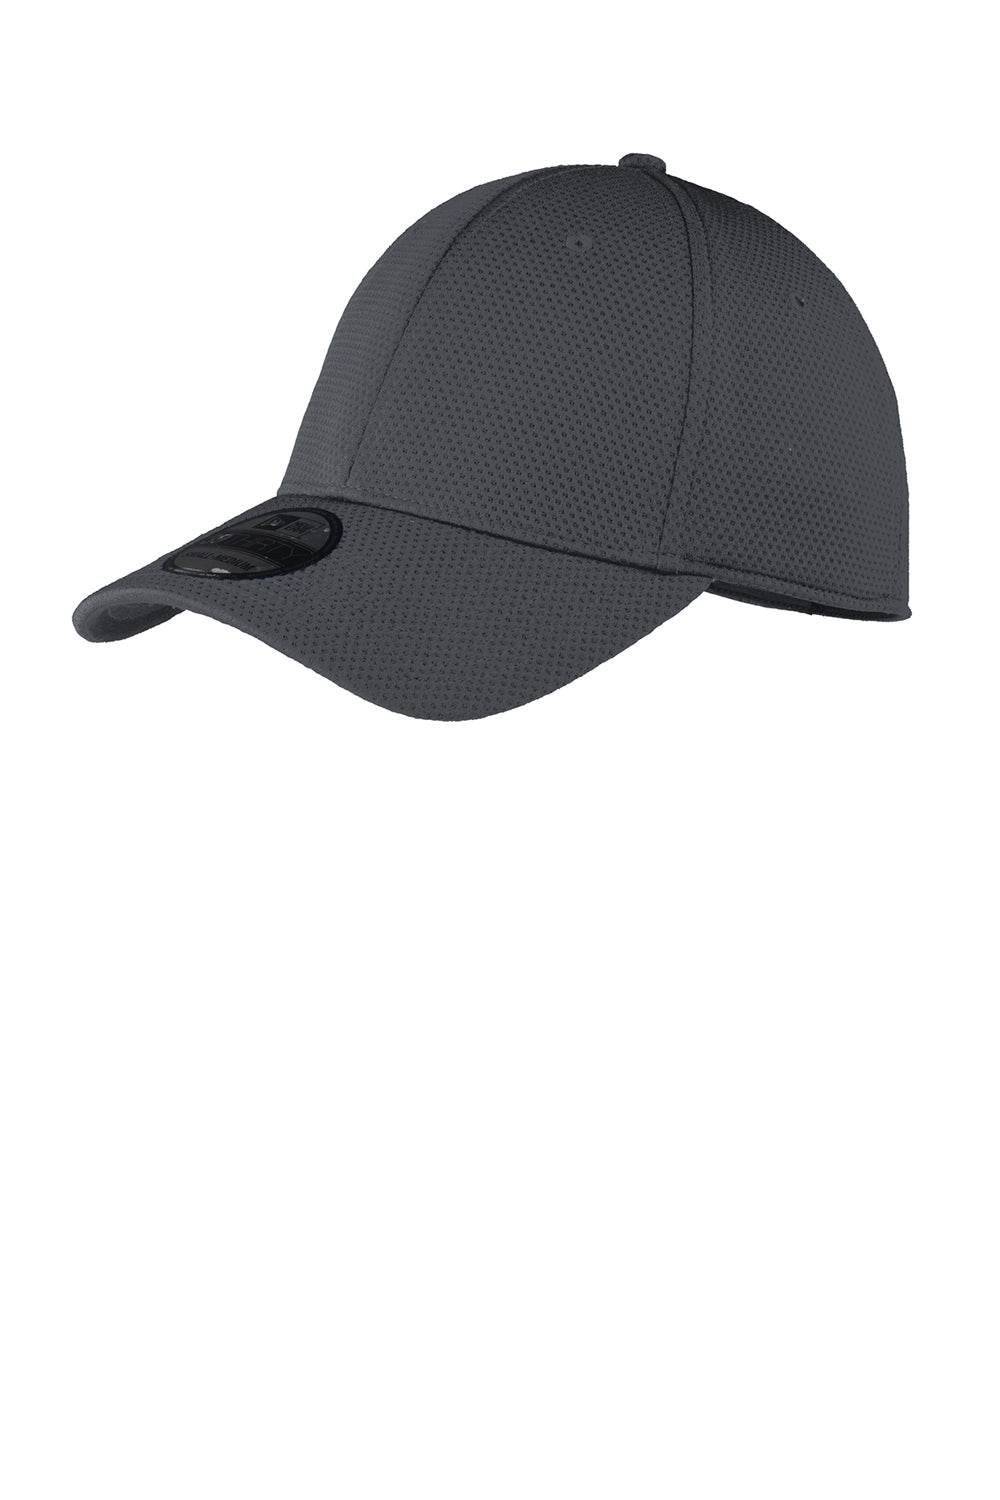 New Era Mens Moisture Wicking Stretch Fit Hat - Charcoal Grey